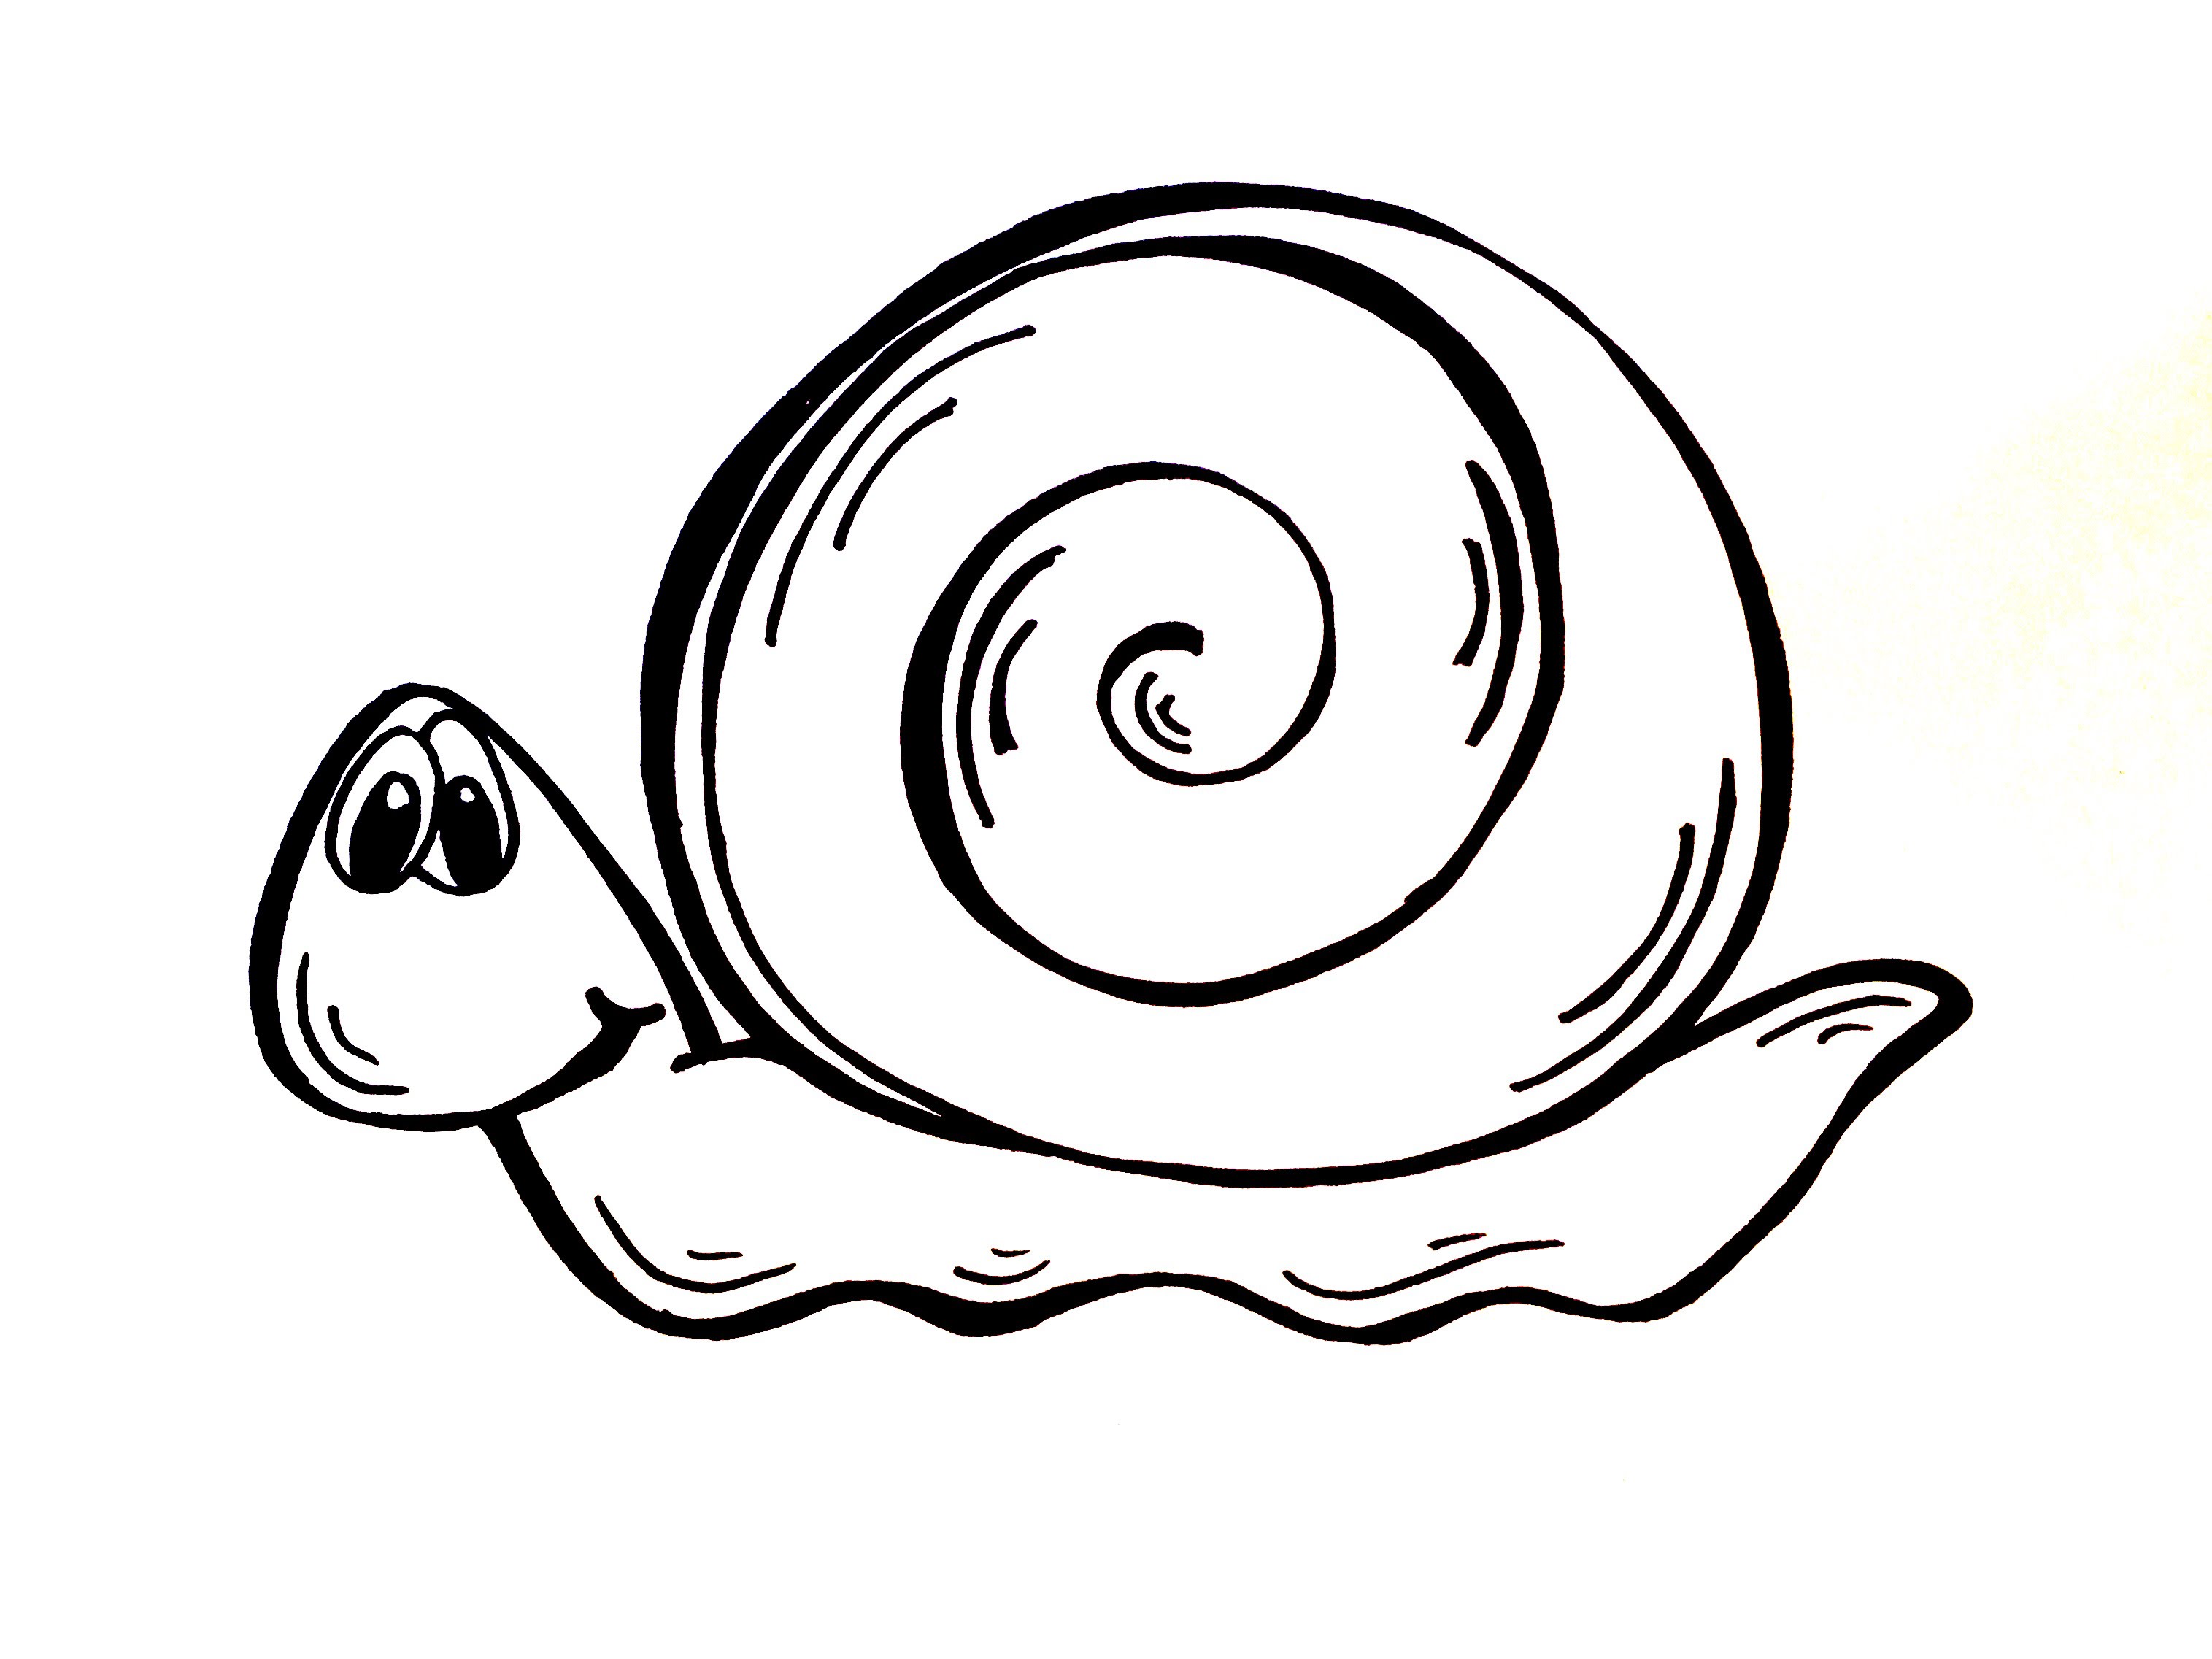 Drawing Lesson: How to Draw a Snail - YouTube